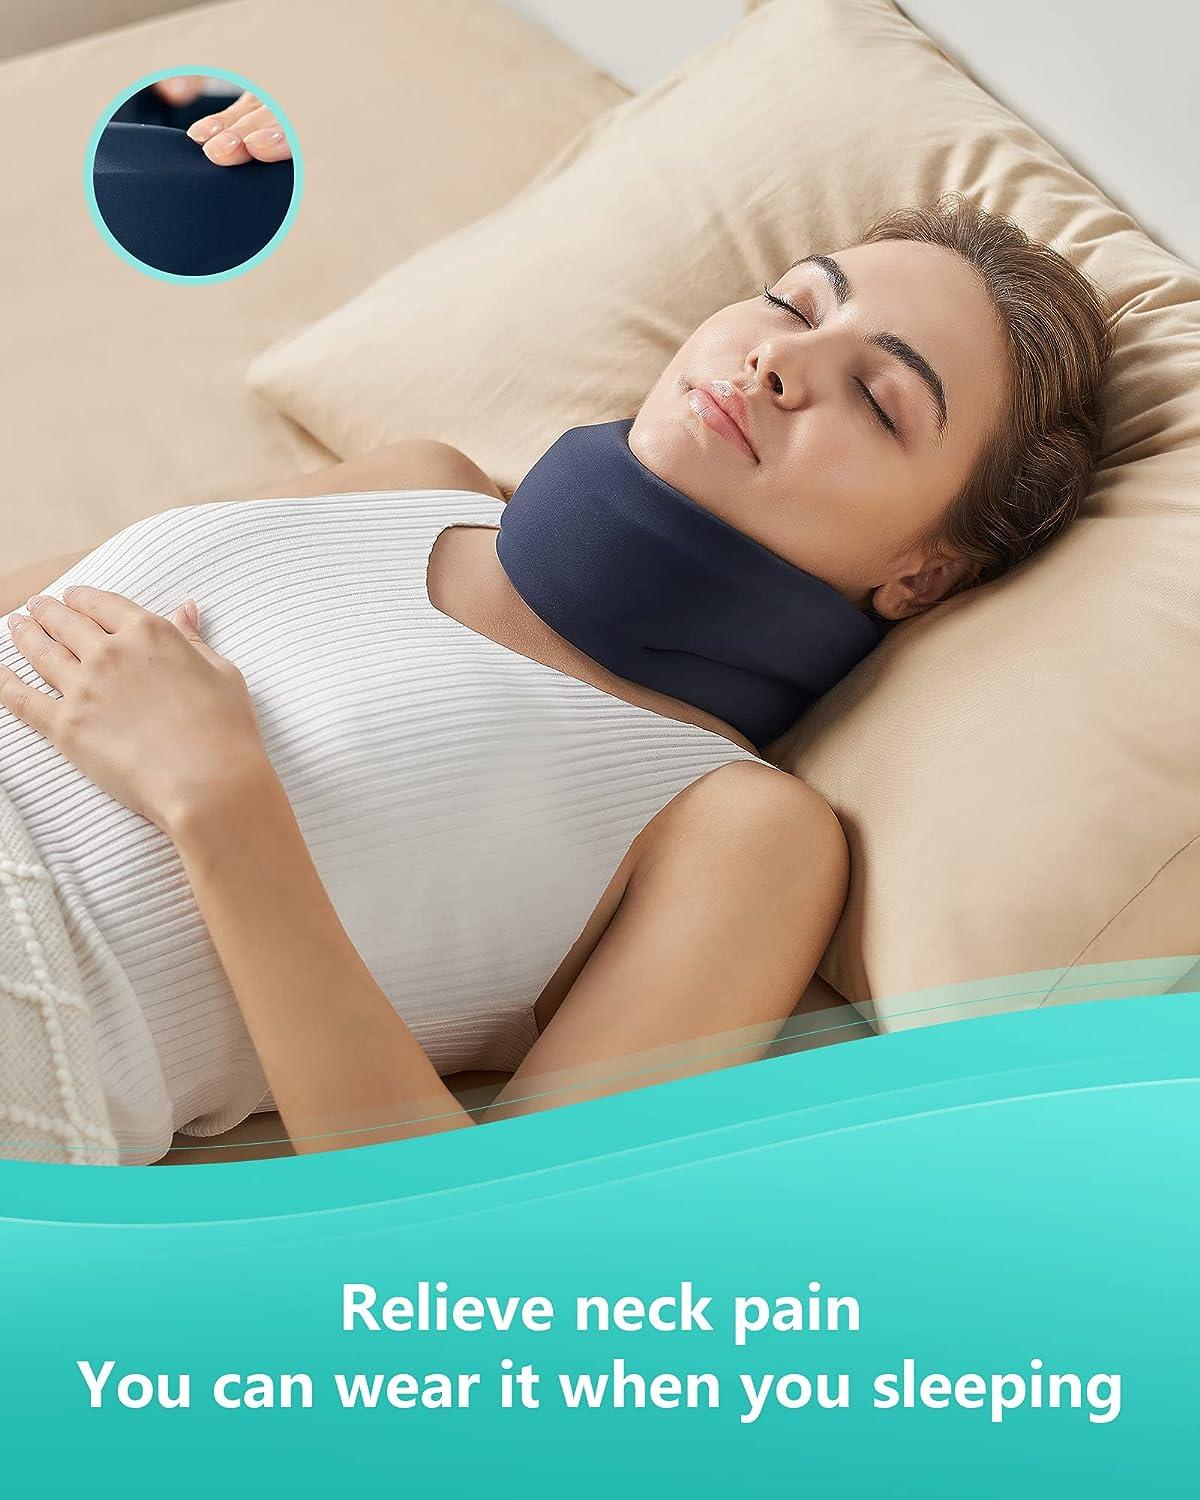 Neck Brace for Neck Pain Relief, Cervical Collar for Sleeping, Soft Foam  Neck Support Relieves Pain & Pressure in Spine, Wraps Keep Vertebrae Stable